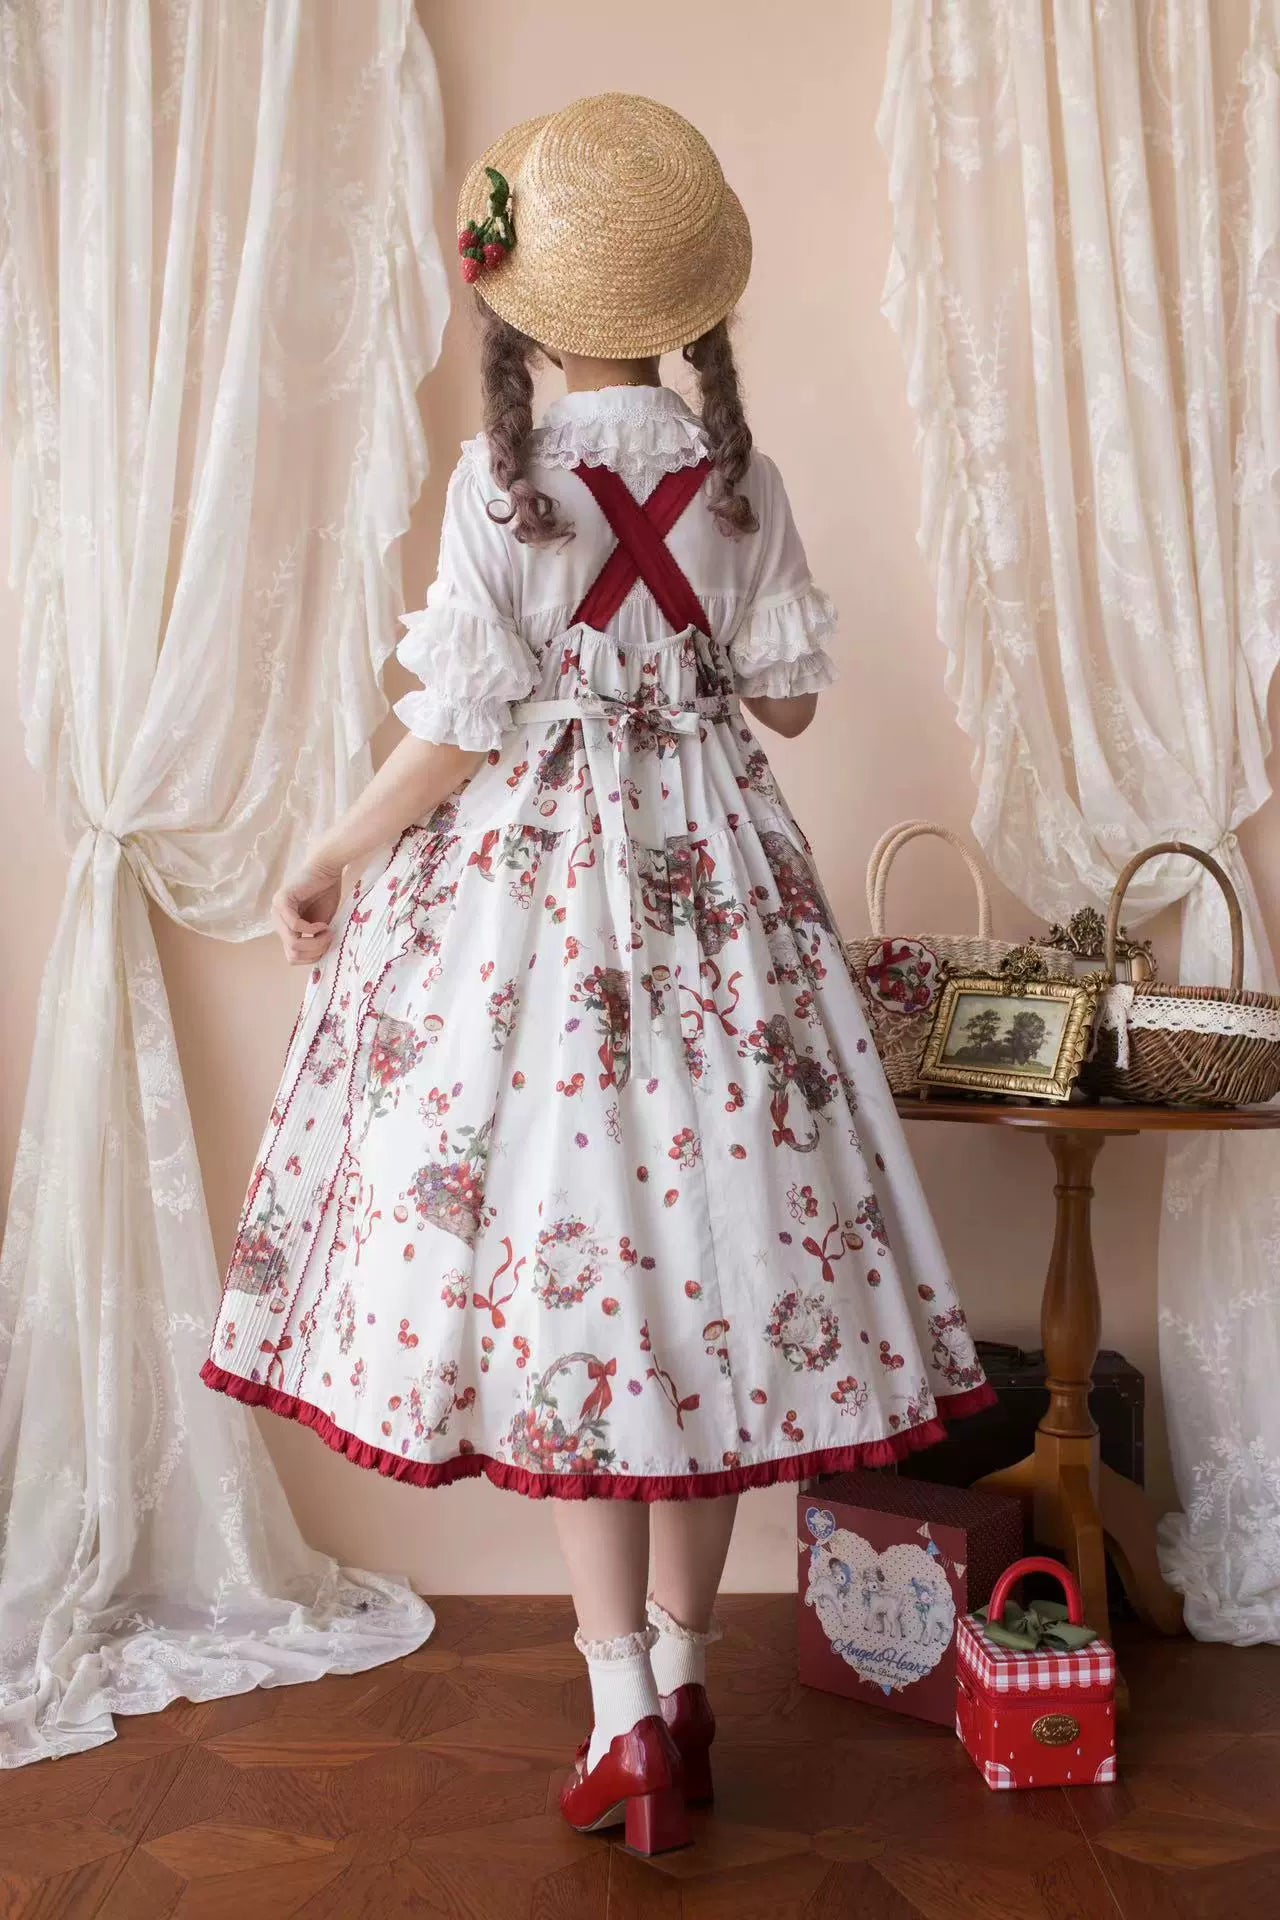 [Sales period ended] Picnic Basket jumper skirt in strawberry pattern